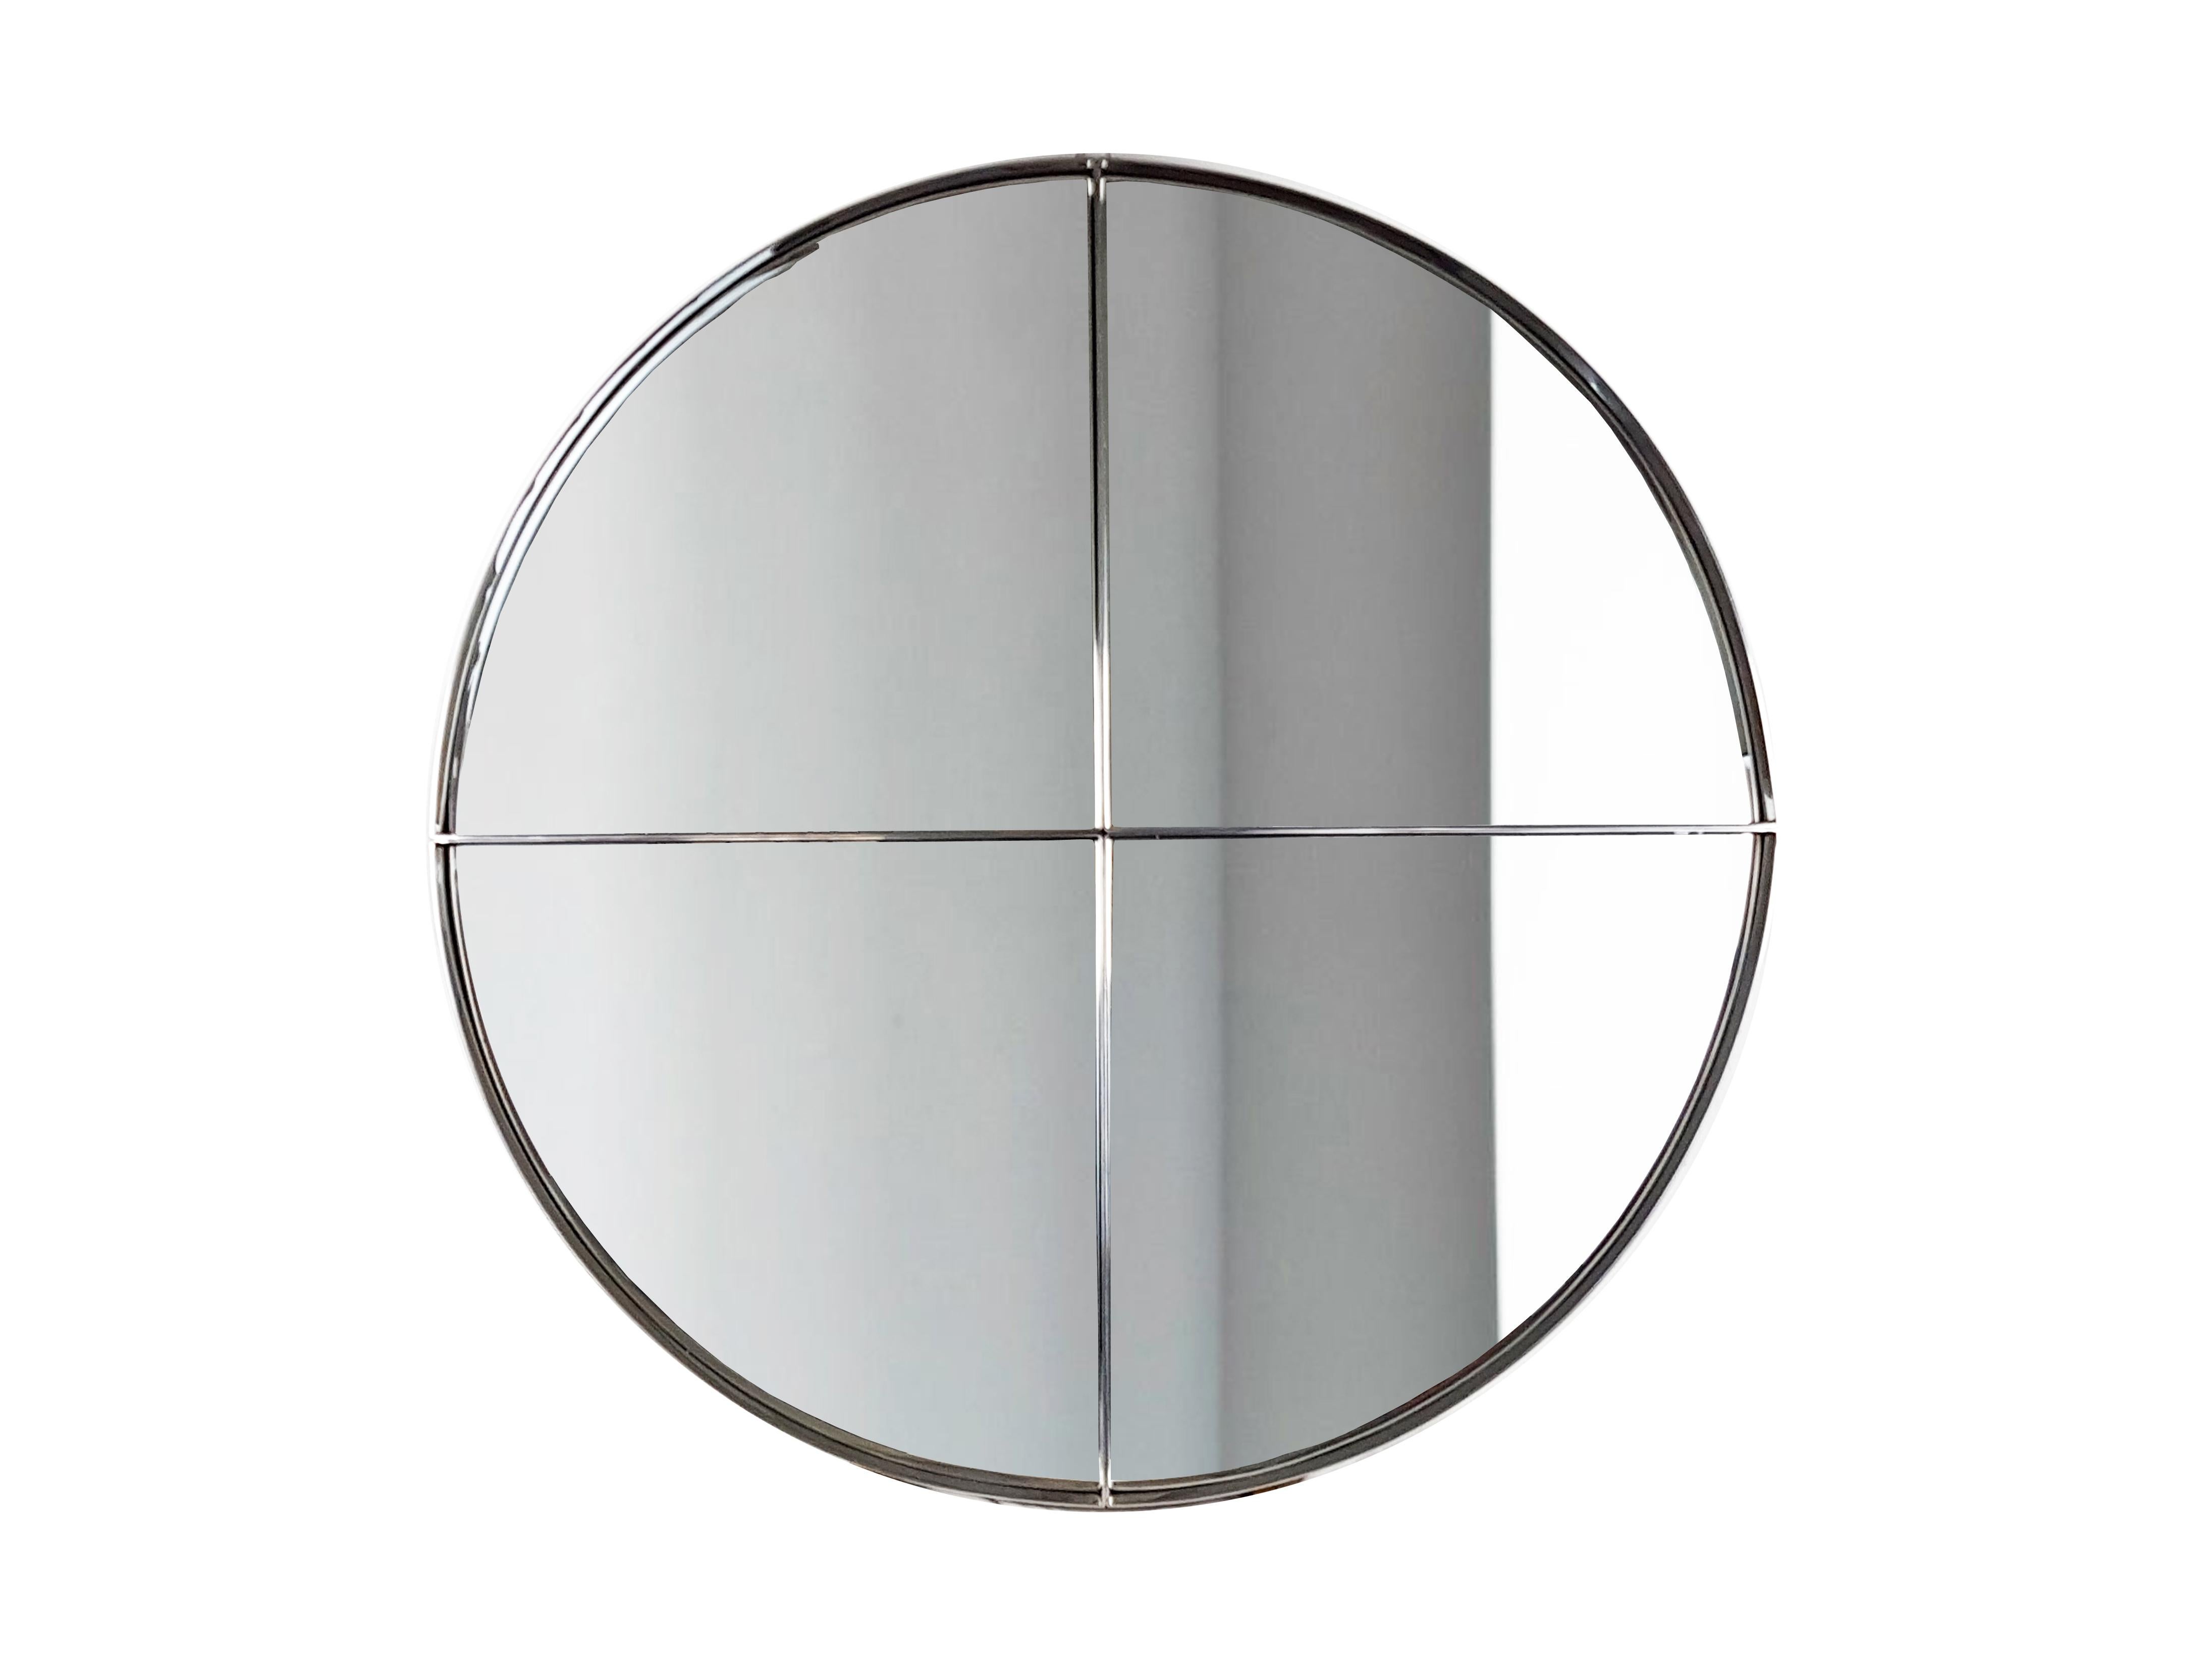 This mirror has considerable dimensions (120 cm in diameter) and is formed by 4 segments of circle, joined together by a pair of screws on the back of the structure. Due to its considerable weight, the mirror could be shipped in 4 separate parts.